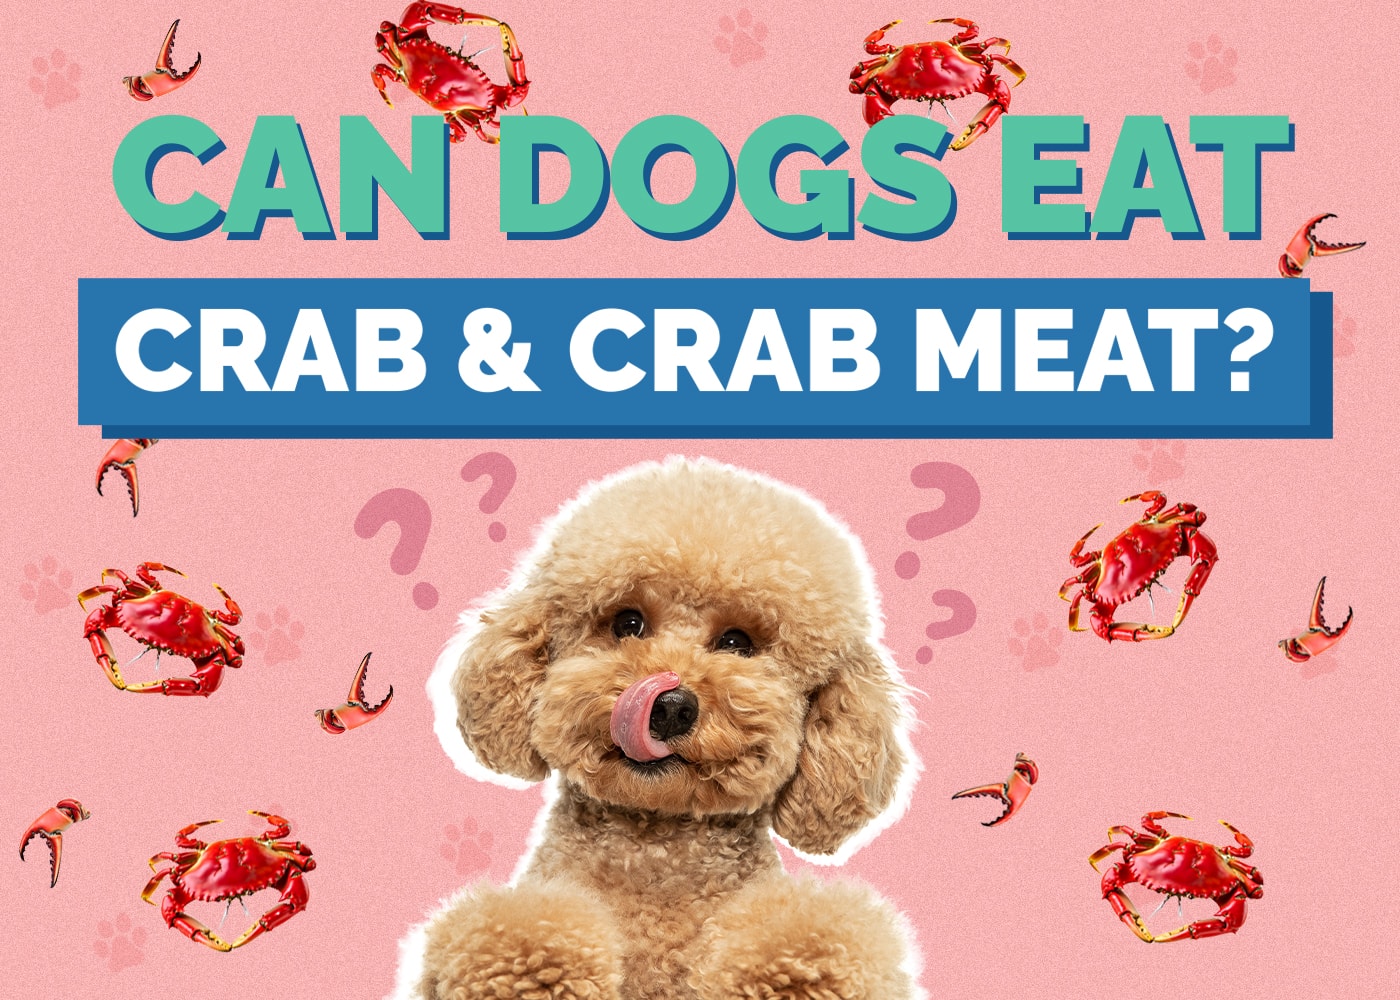 Can Dog Eat crab